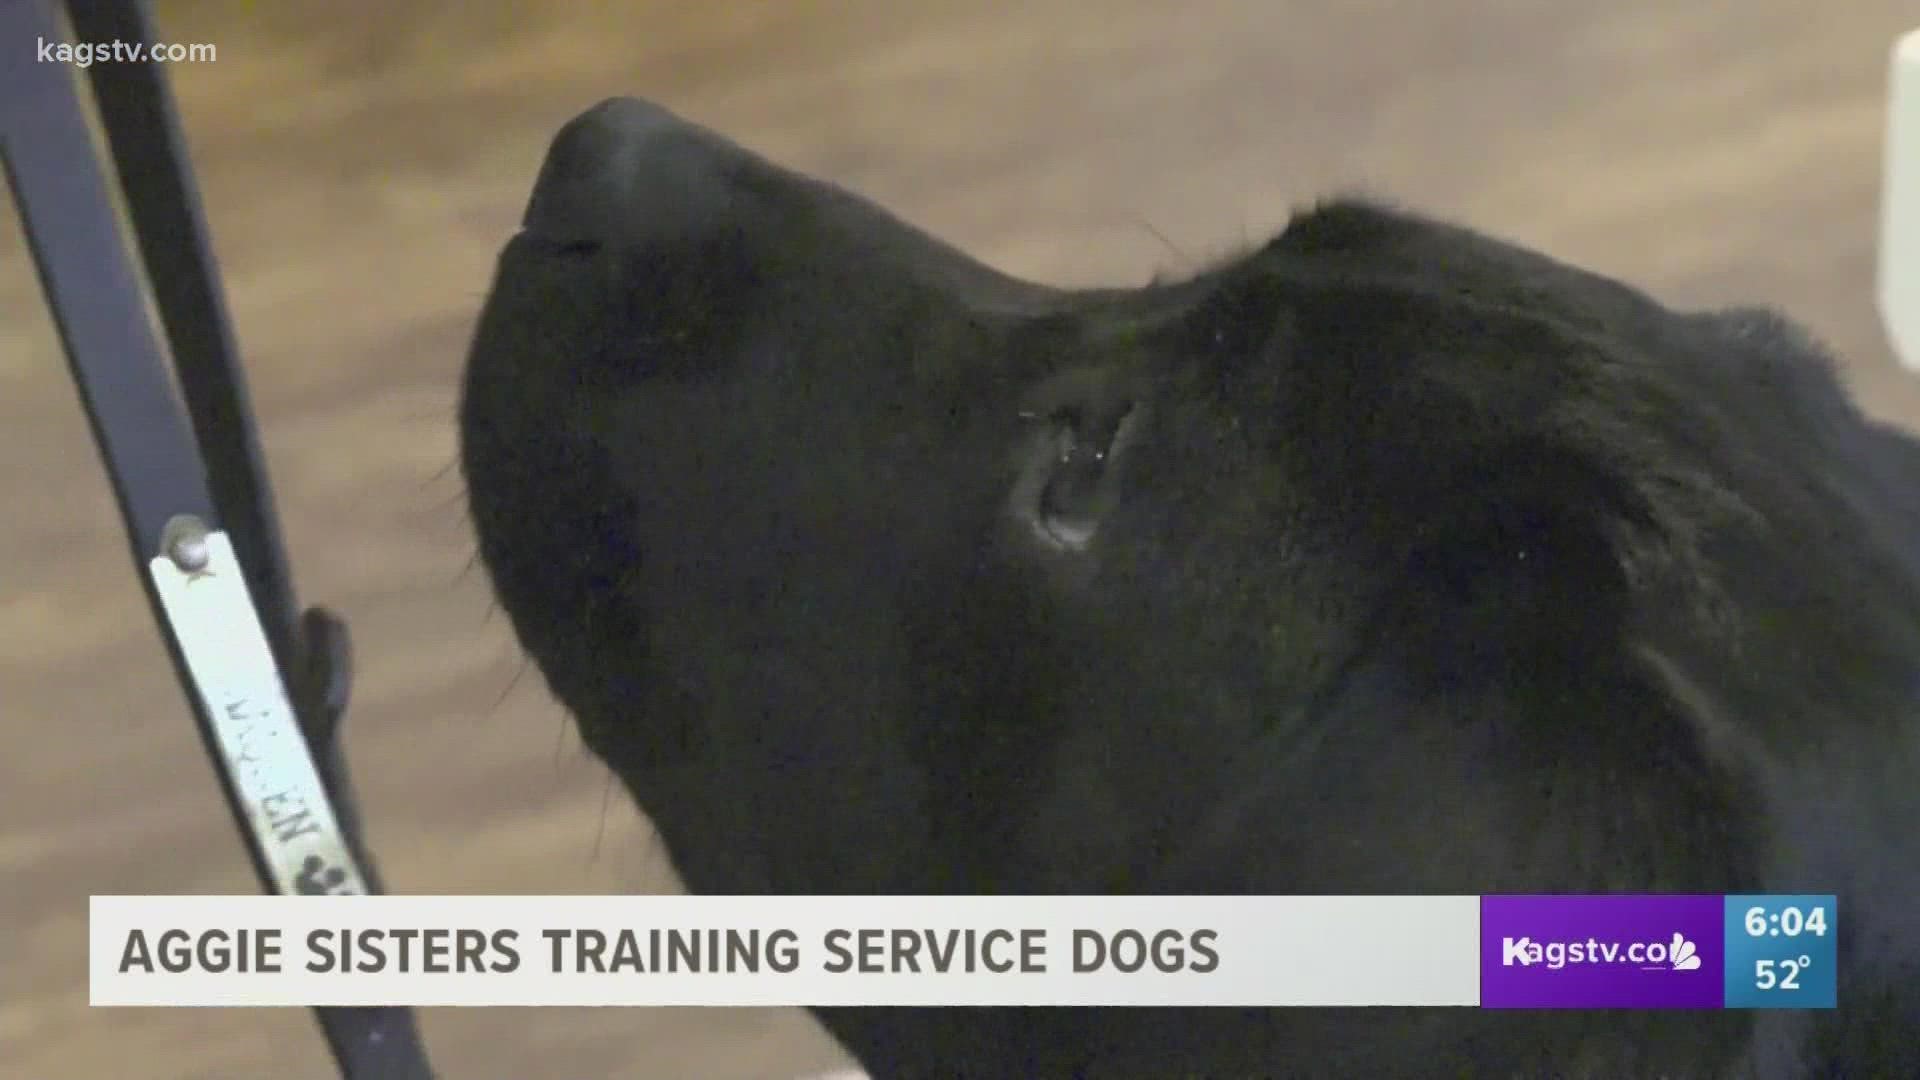 The sisters are helping train service dogs that will later help kids and adults with disabilities, but also veterans.